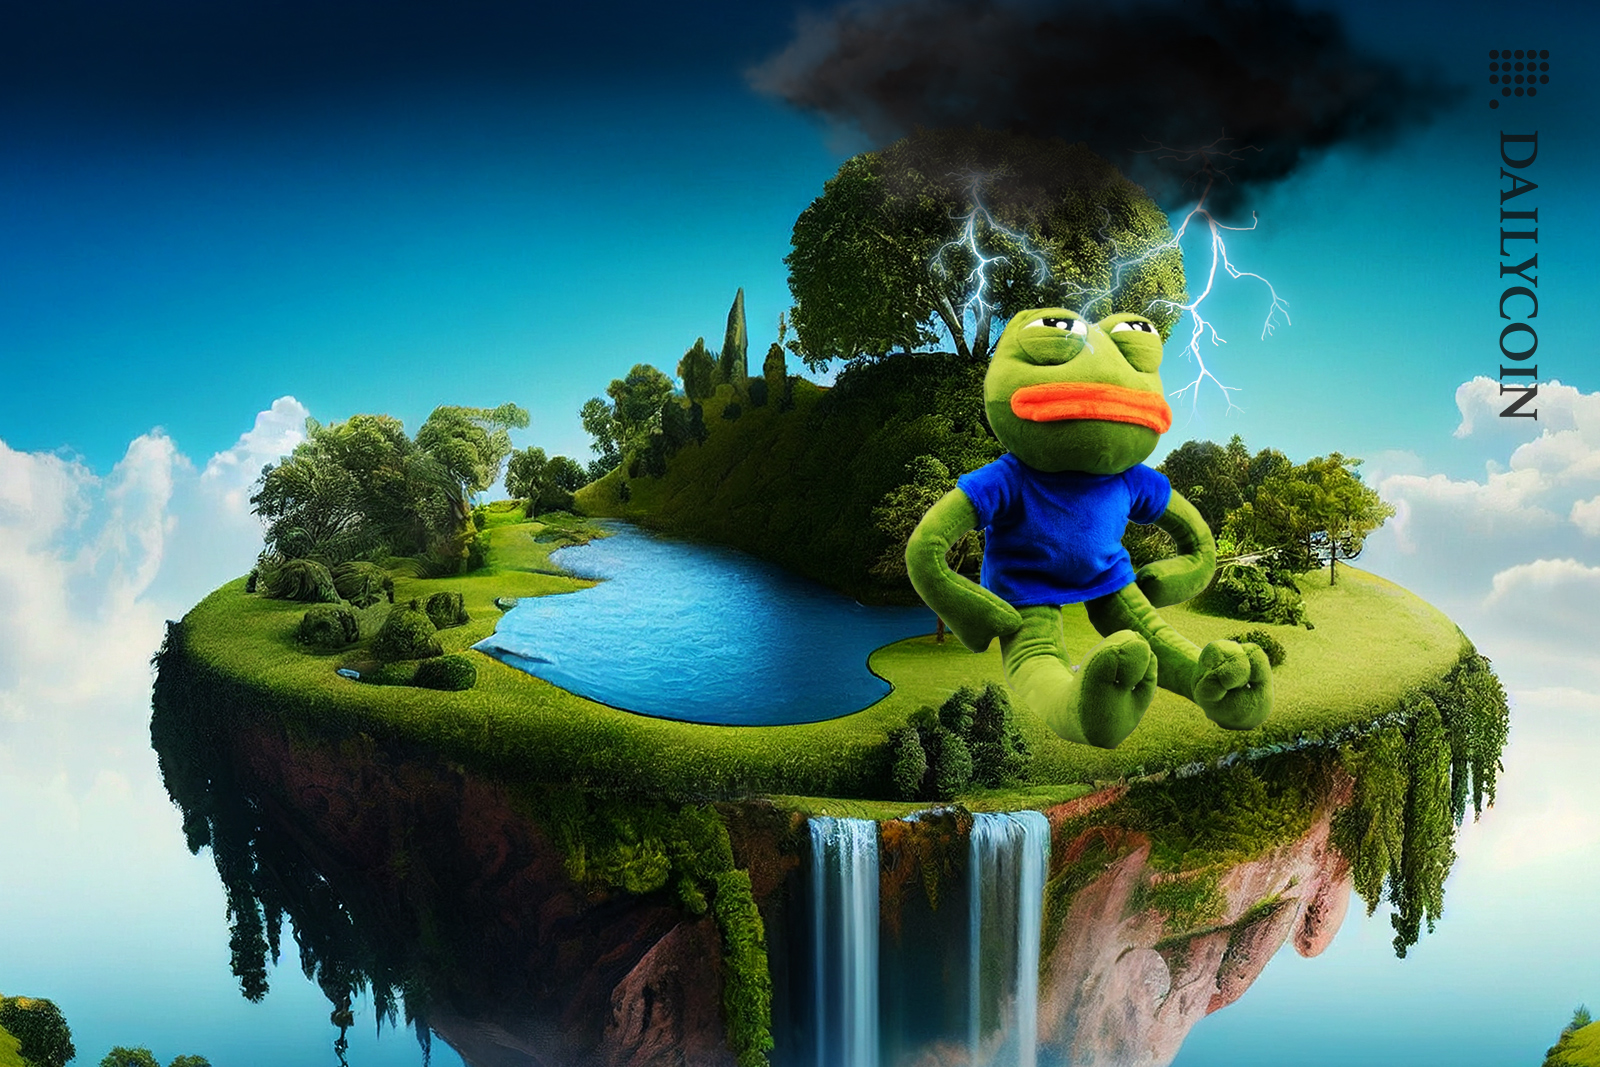 Pepe sitting on a floating island with a pond and looking up at the stormy cloud above him.